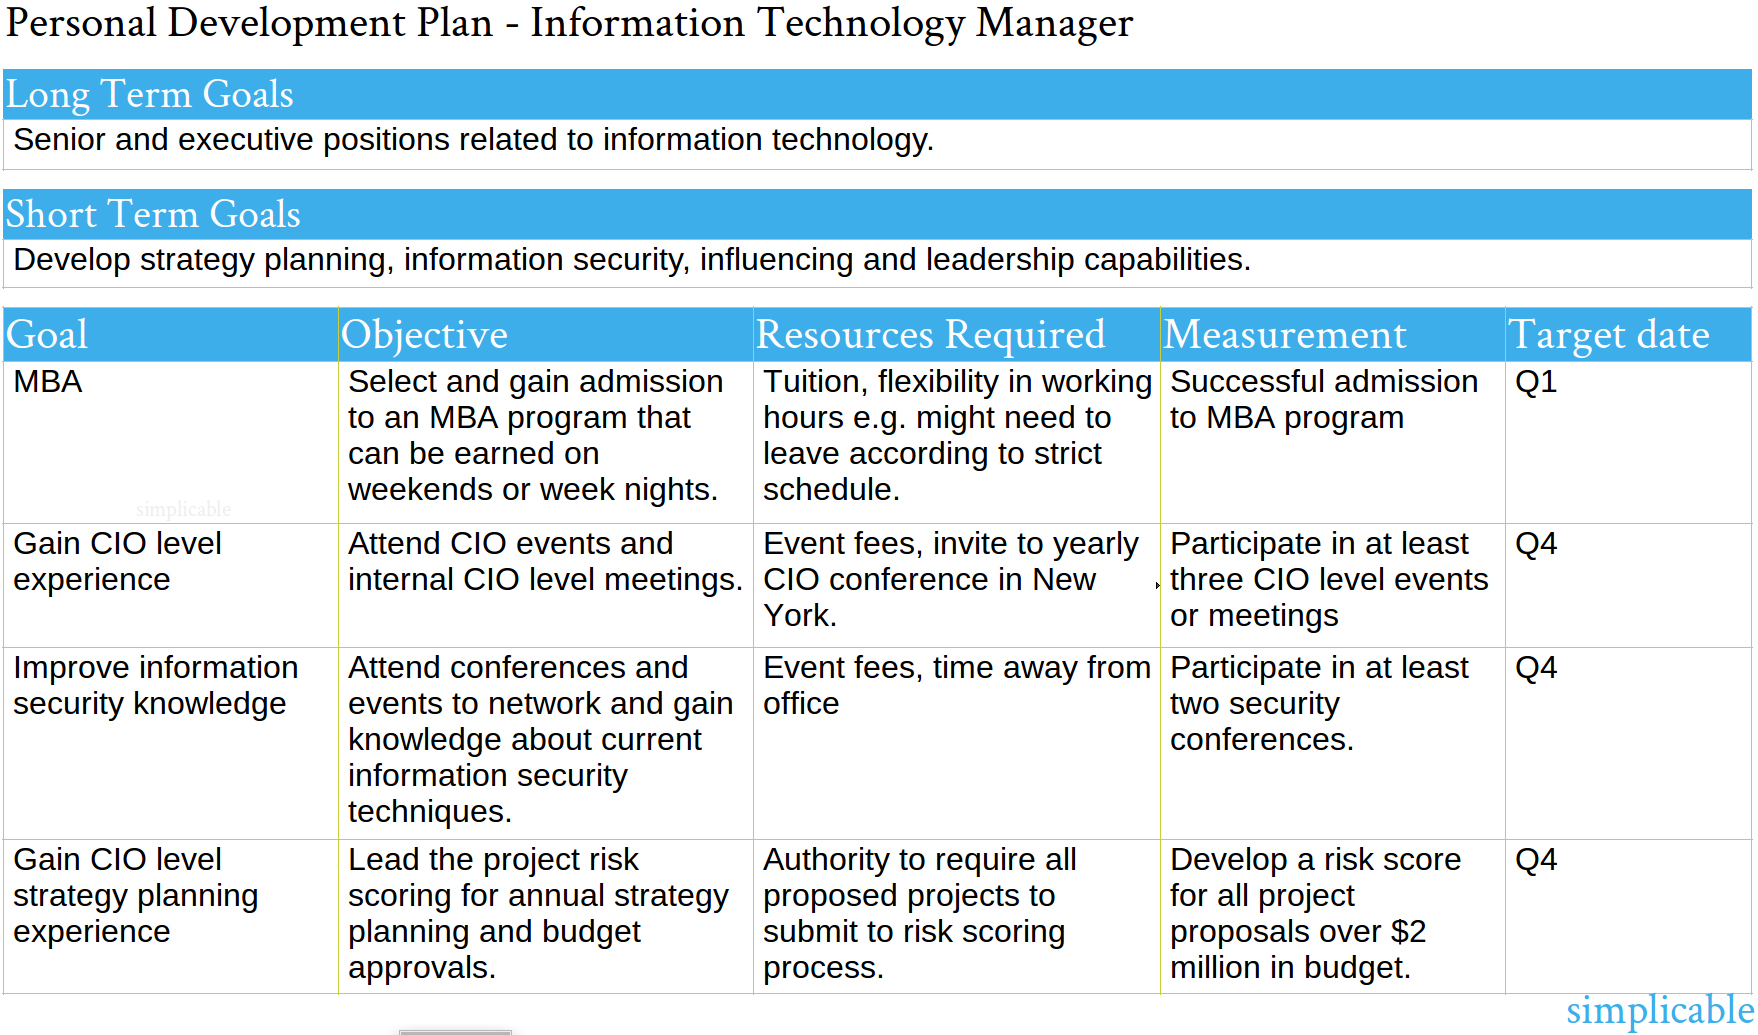 An illustrative example of a personal development plan for an IT manager role.  Shows that resources can include anything beyond your control including abstract resources such as authority and flexibility.